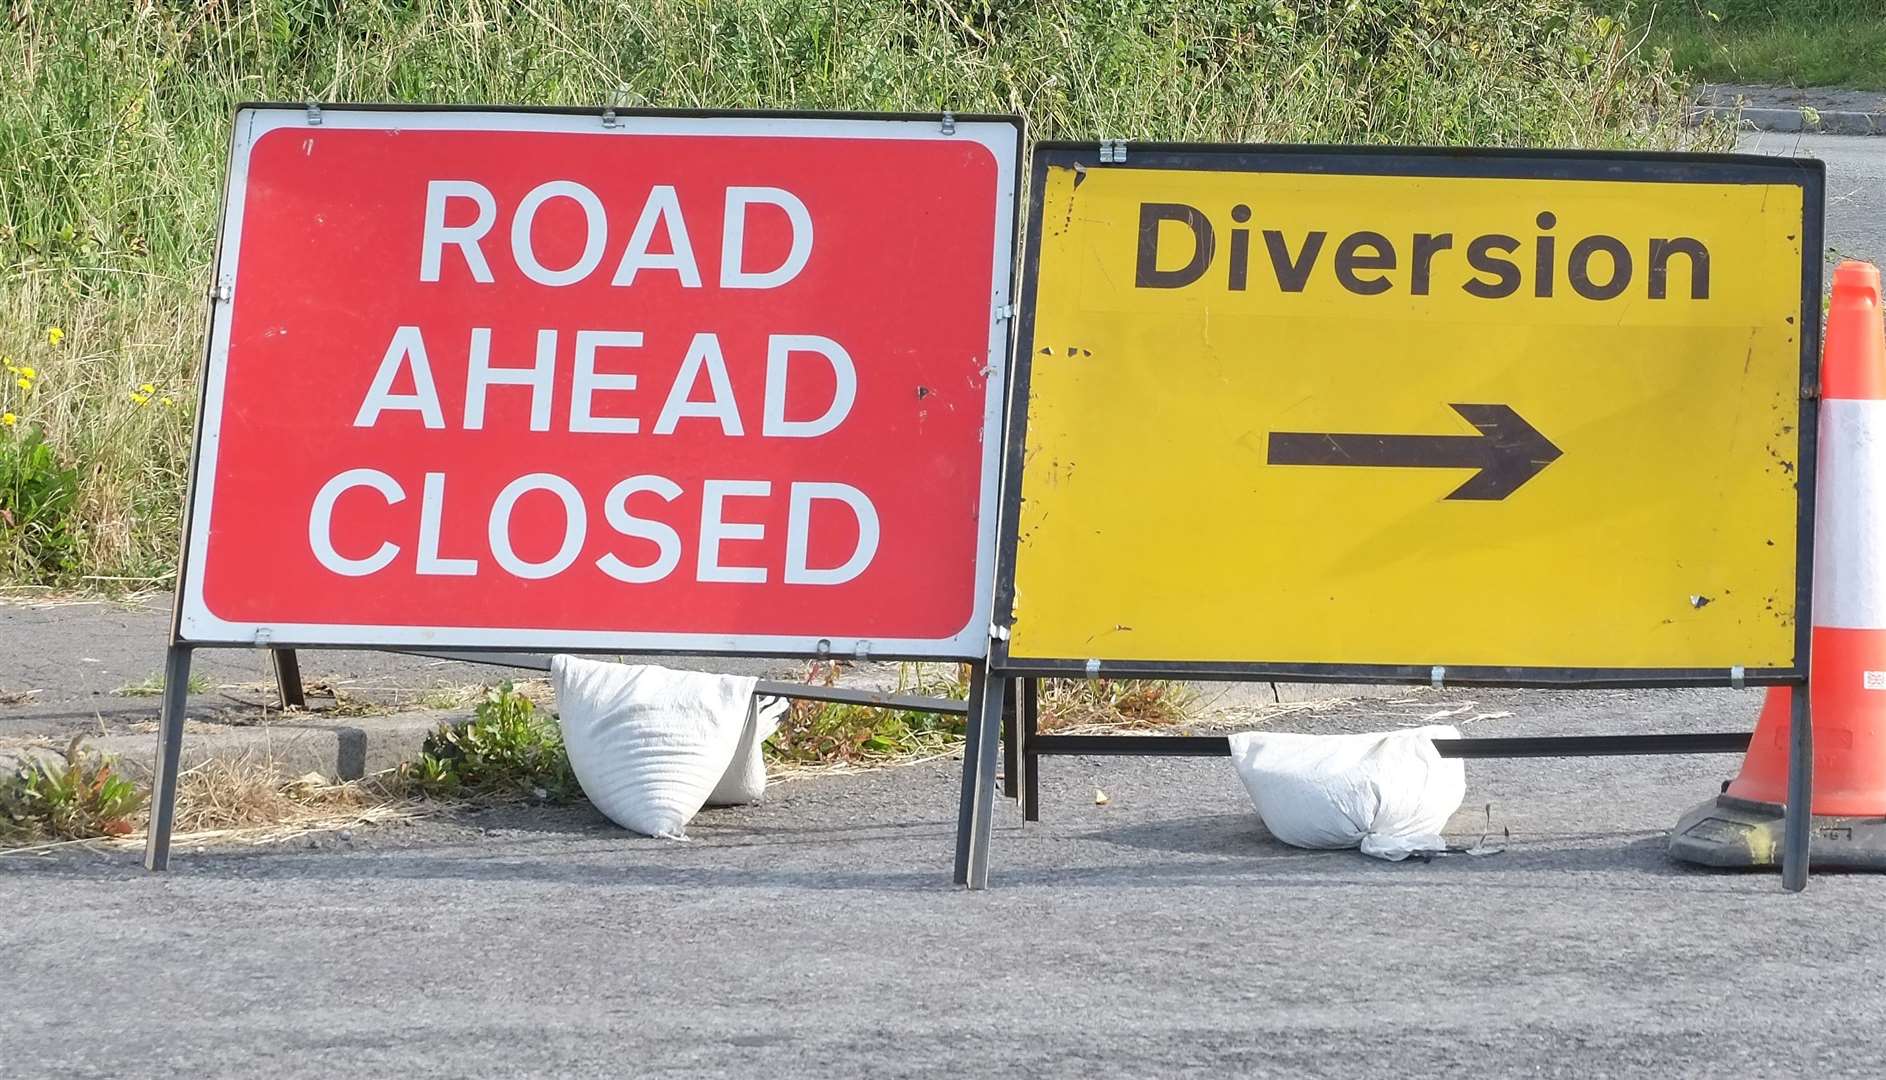 The road is closed in both directions